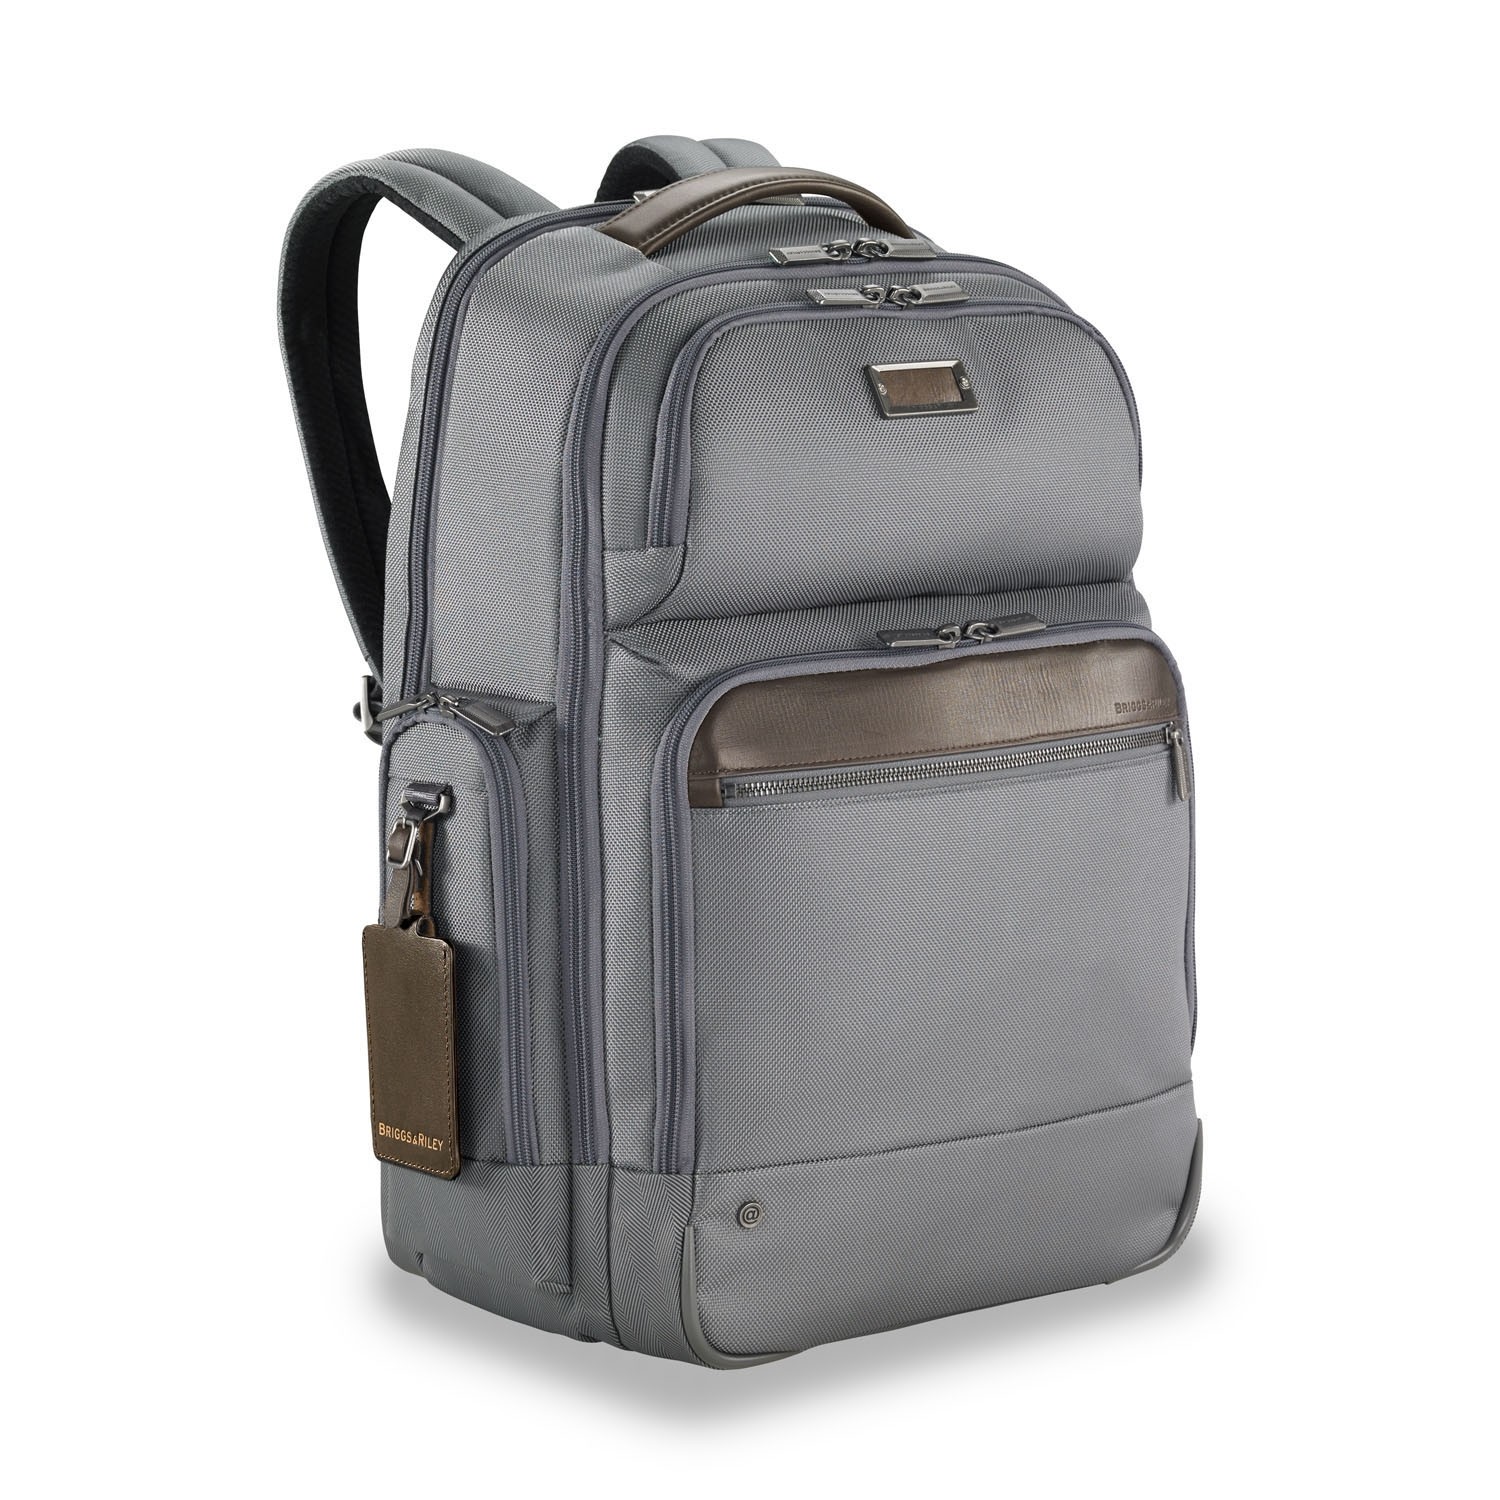 Briggs & Riley @work Large Cargo Backpack - Grey - Irv’s Luggage